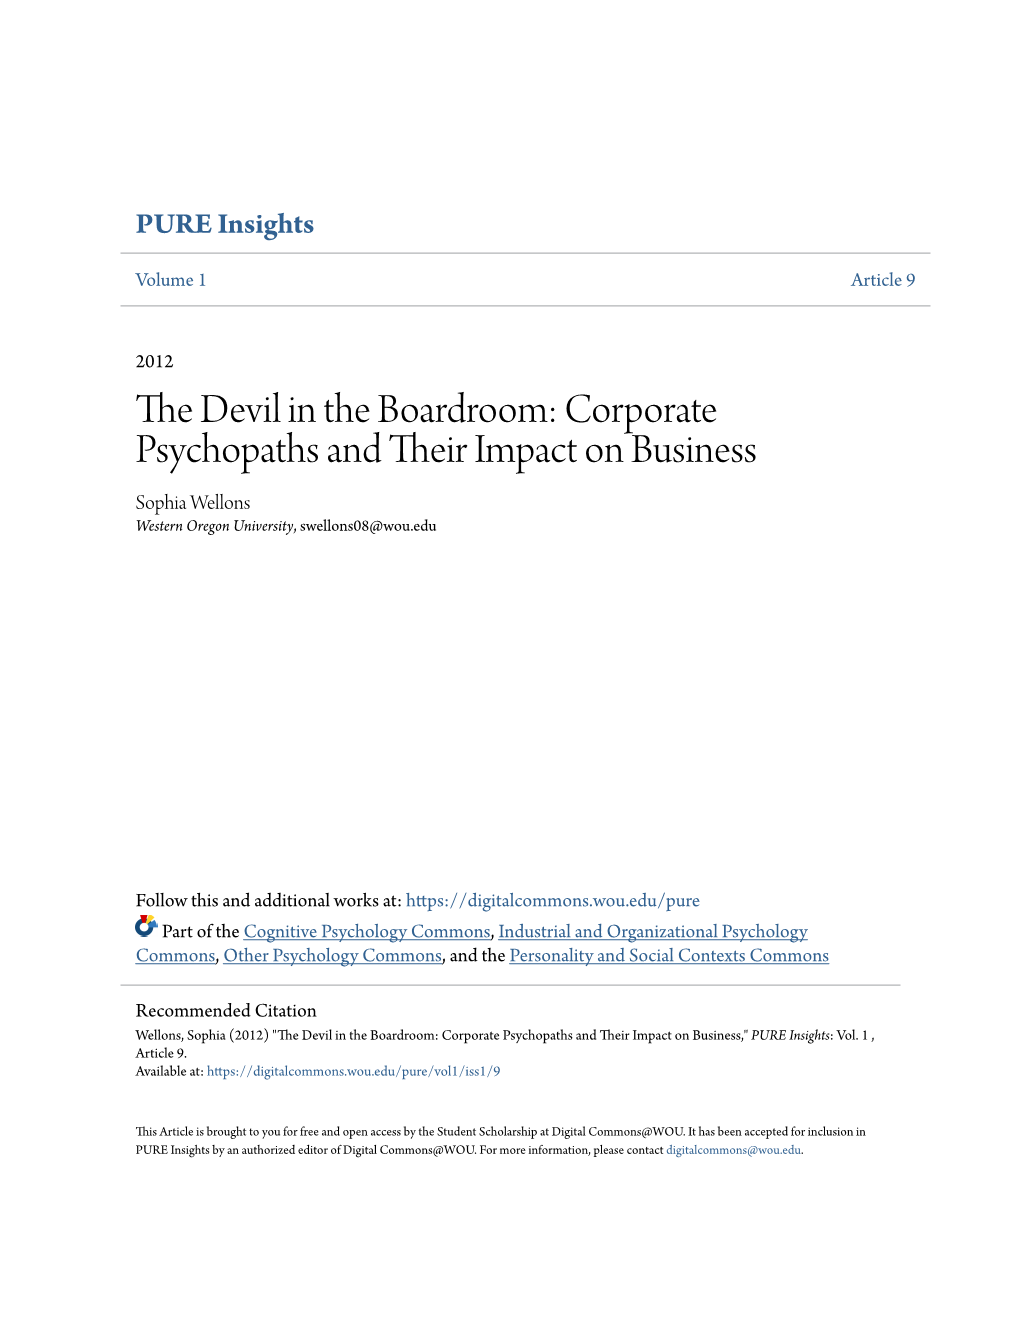 The Devil in the Boardroom: Corporate Psychopaths and Their Impact on Business